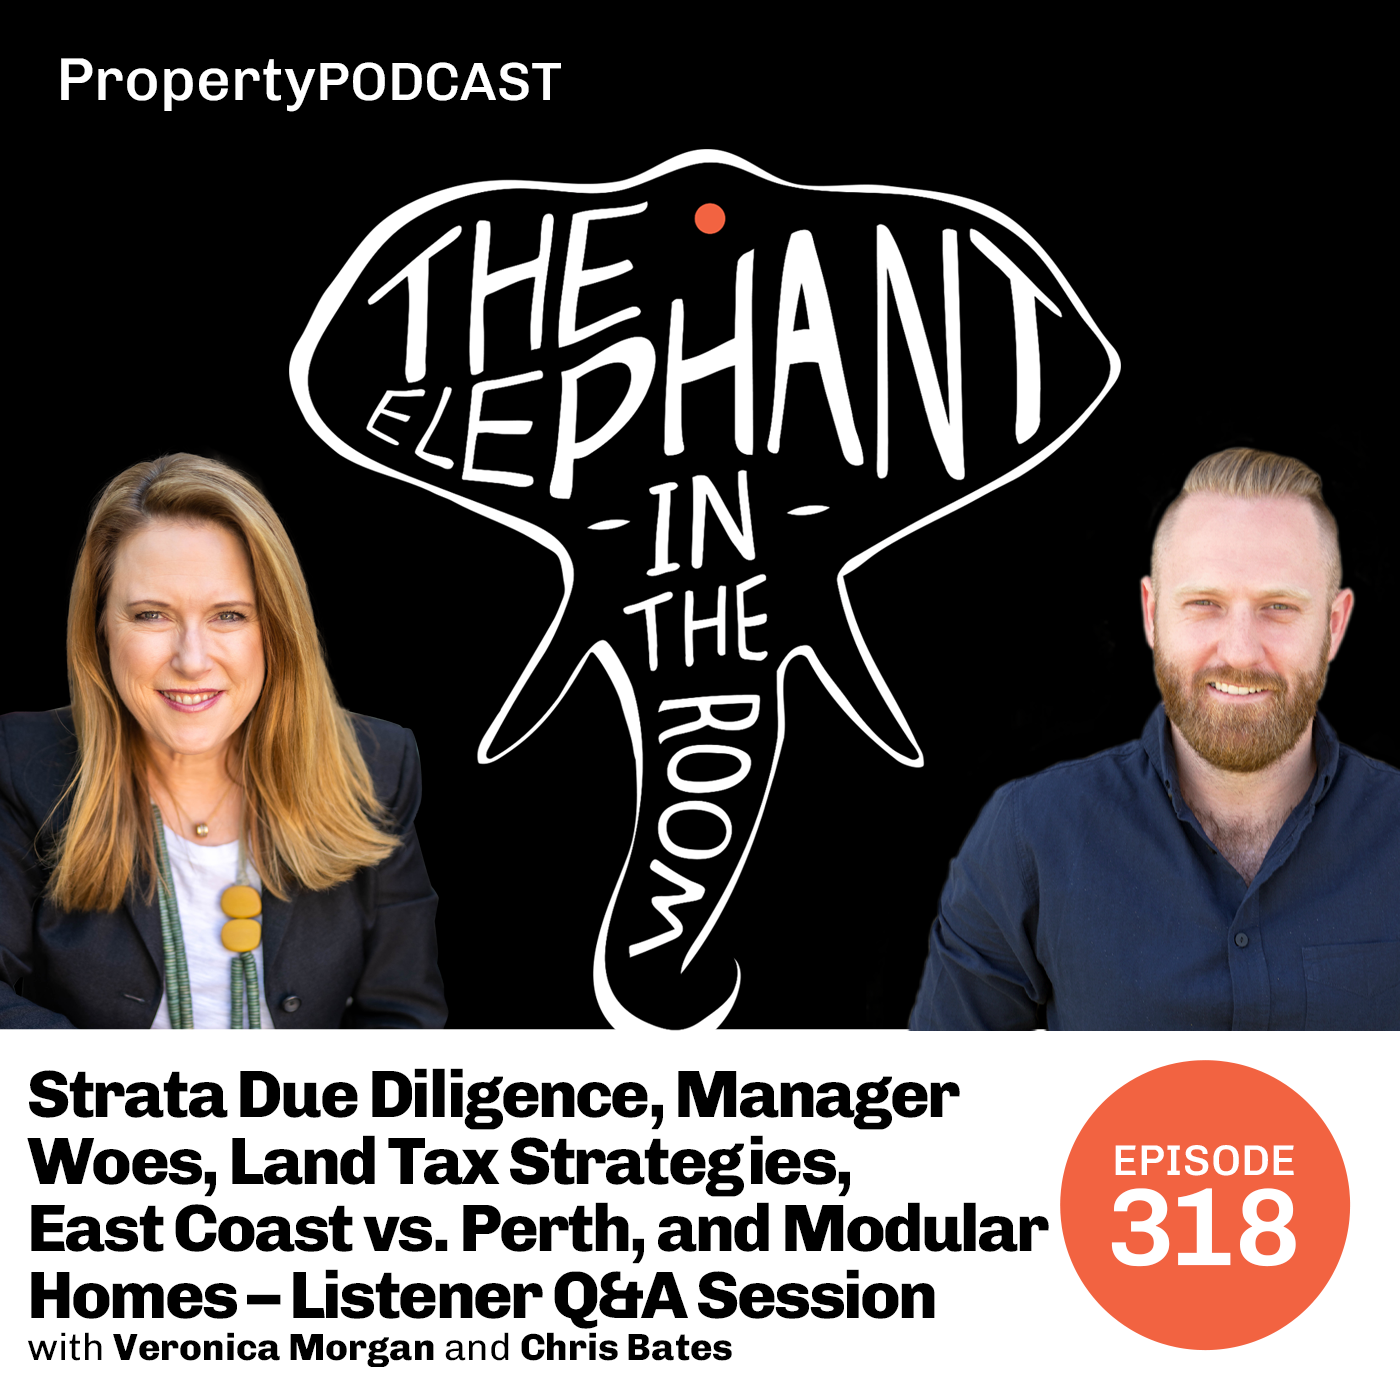 Strata Due Diligence, Manager Woes, Land Tax Strategies, East Coast vs. Perth, and Modular Homes – Listener Q&A Session